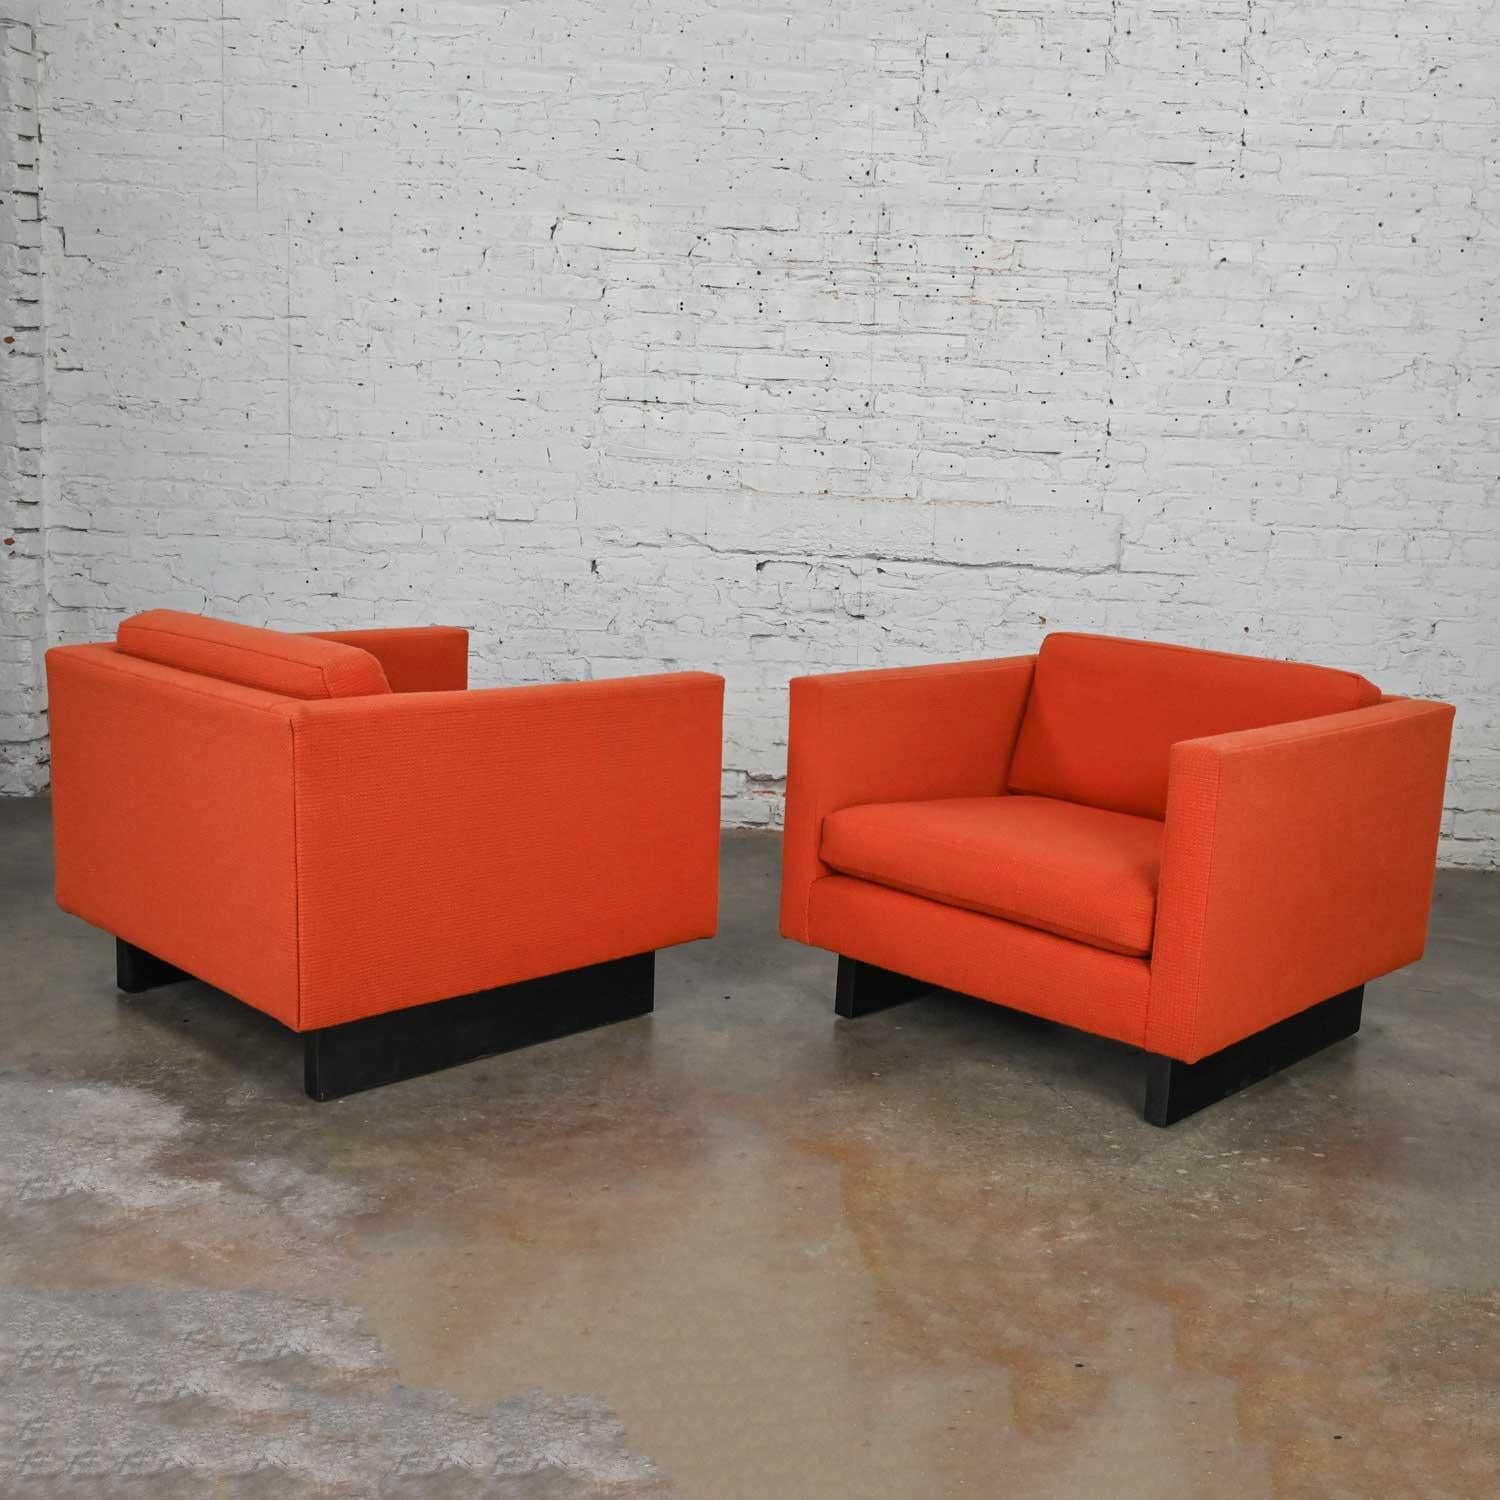 1970s Mcm to Modern Harvey Probber Club Chairs Orange 1571 Tuxedo Sleigh Bases For Sale 2